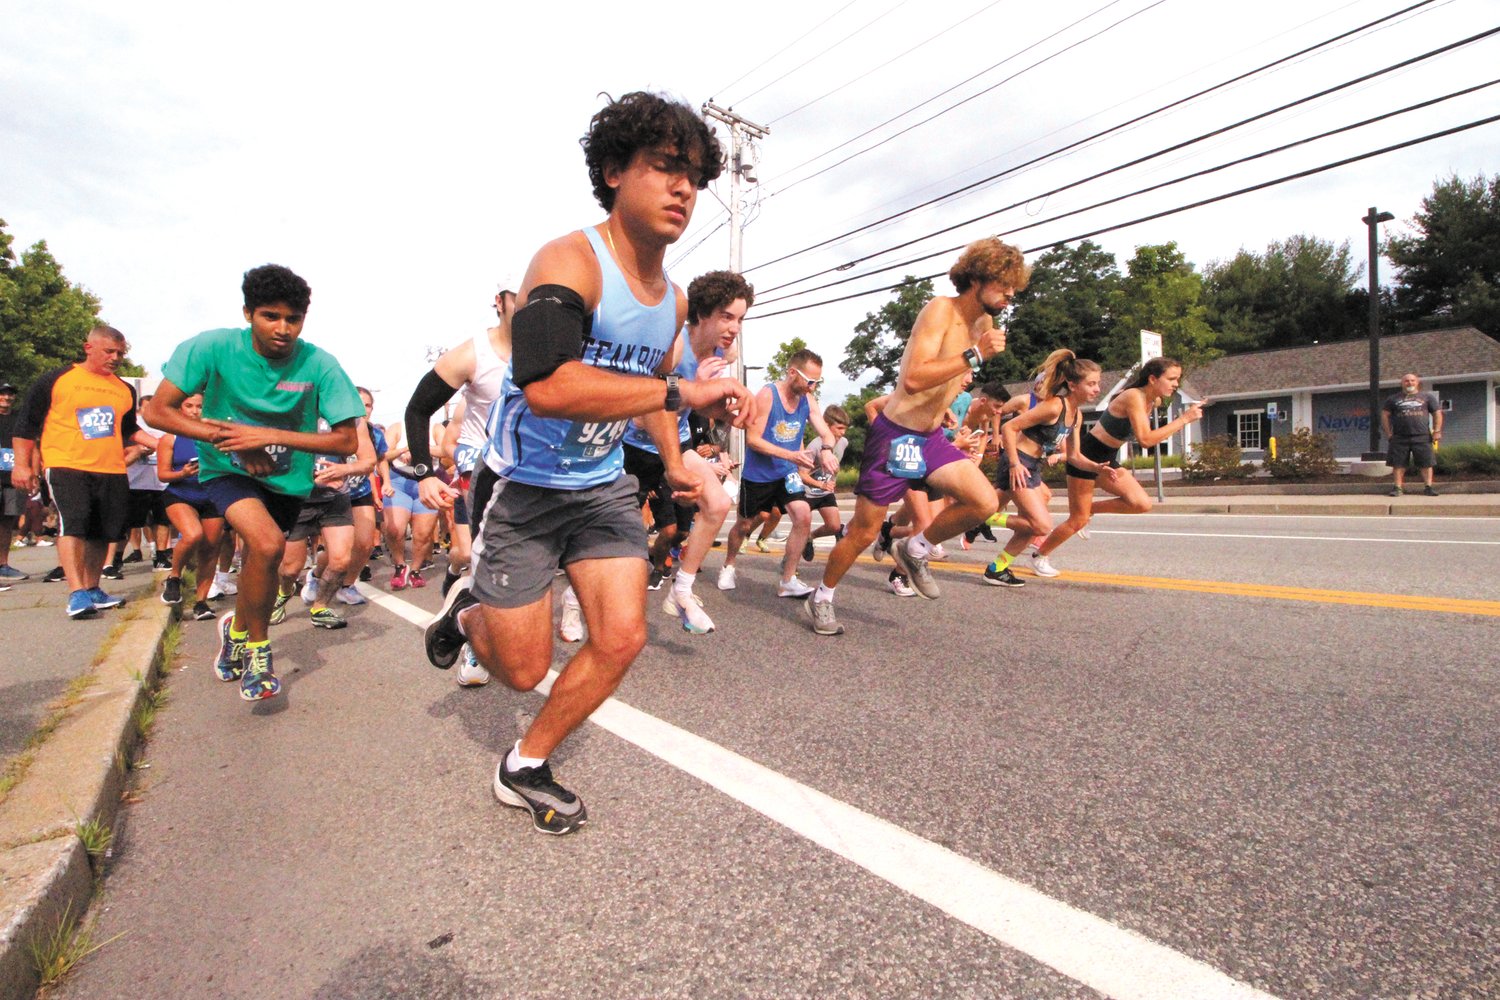 Runners in the St. Mary’s Feast Society 5K Road Race held Sunday take off after Mayor Ken Hopkins gave the countdown. (Warwick Beacon photos)